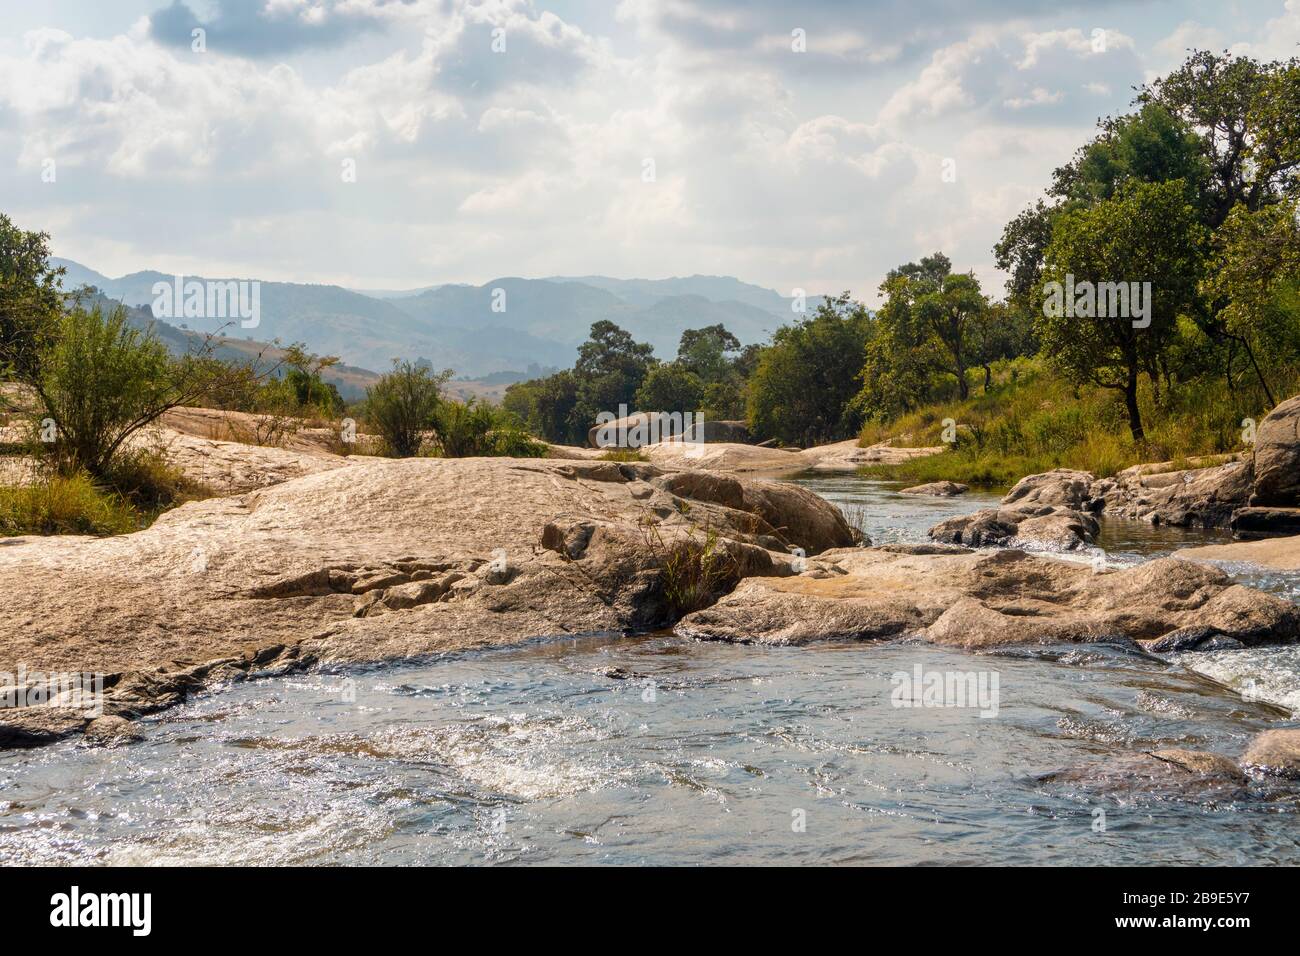 Beautiful landscape with rocky stream in Eswatini, Africa Stock Photo